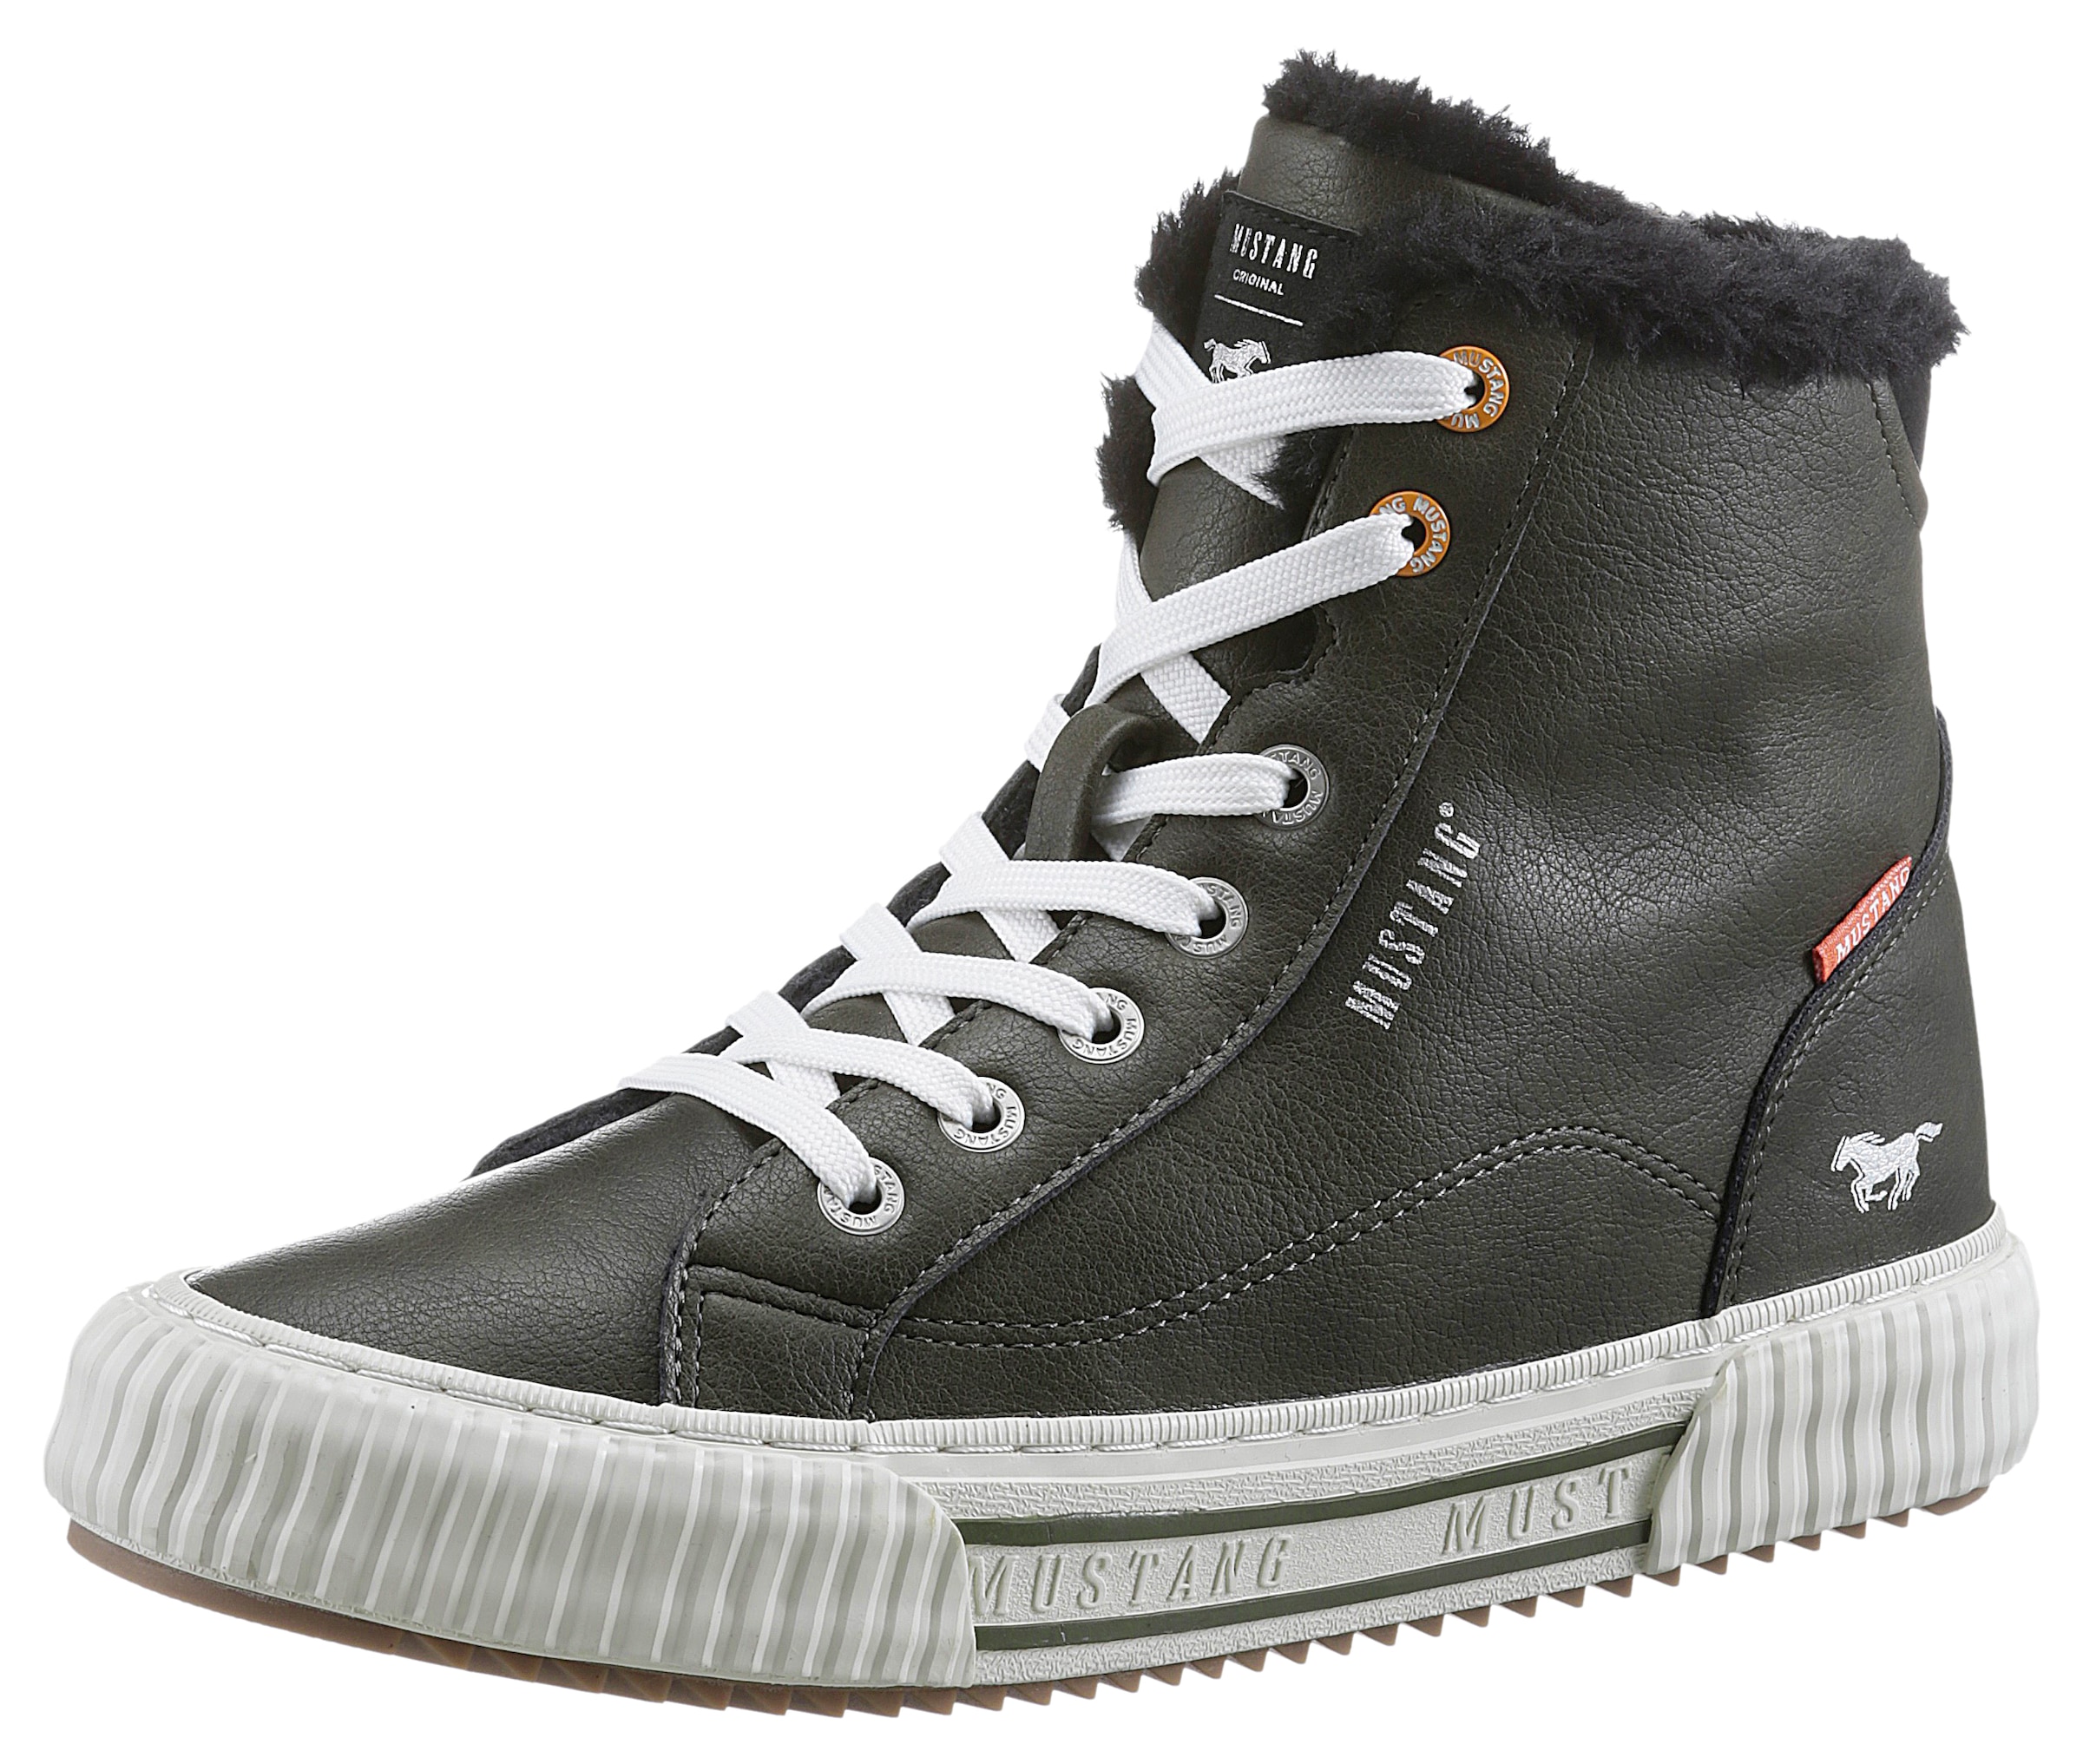 Mustang Shoes Plateausohle Winterboots, ♕ bei mit